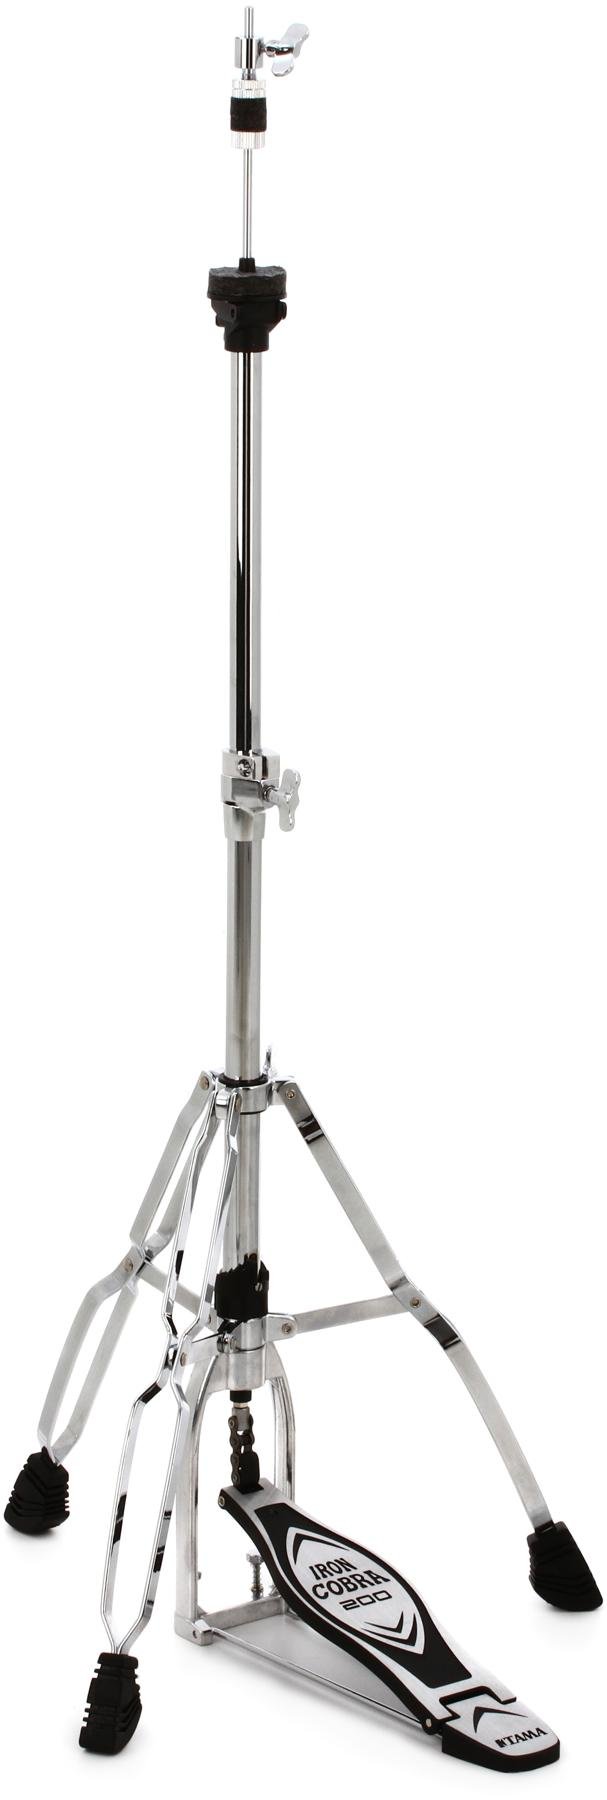 Tama HH205 Iron Cobra 200 Hi-hat Stand - Double Braced | Sweetwater